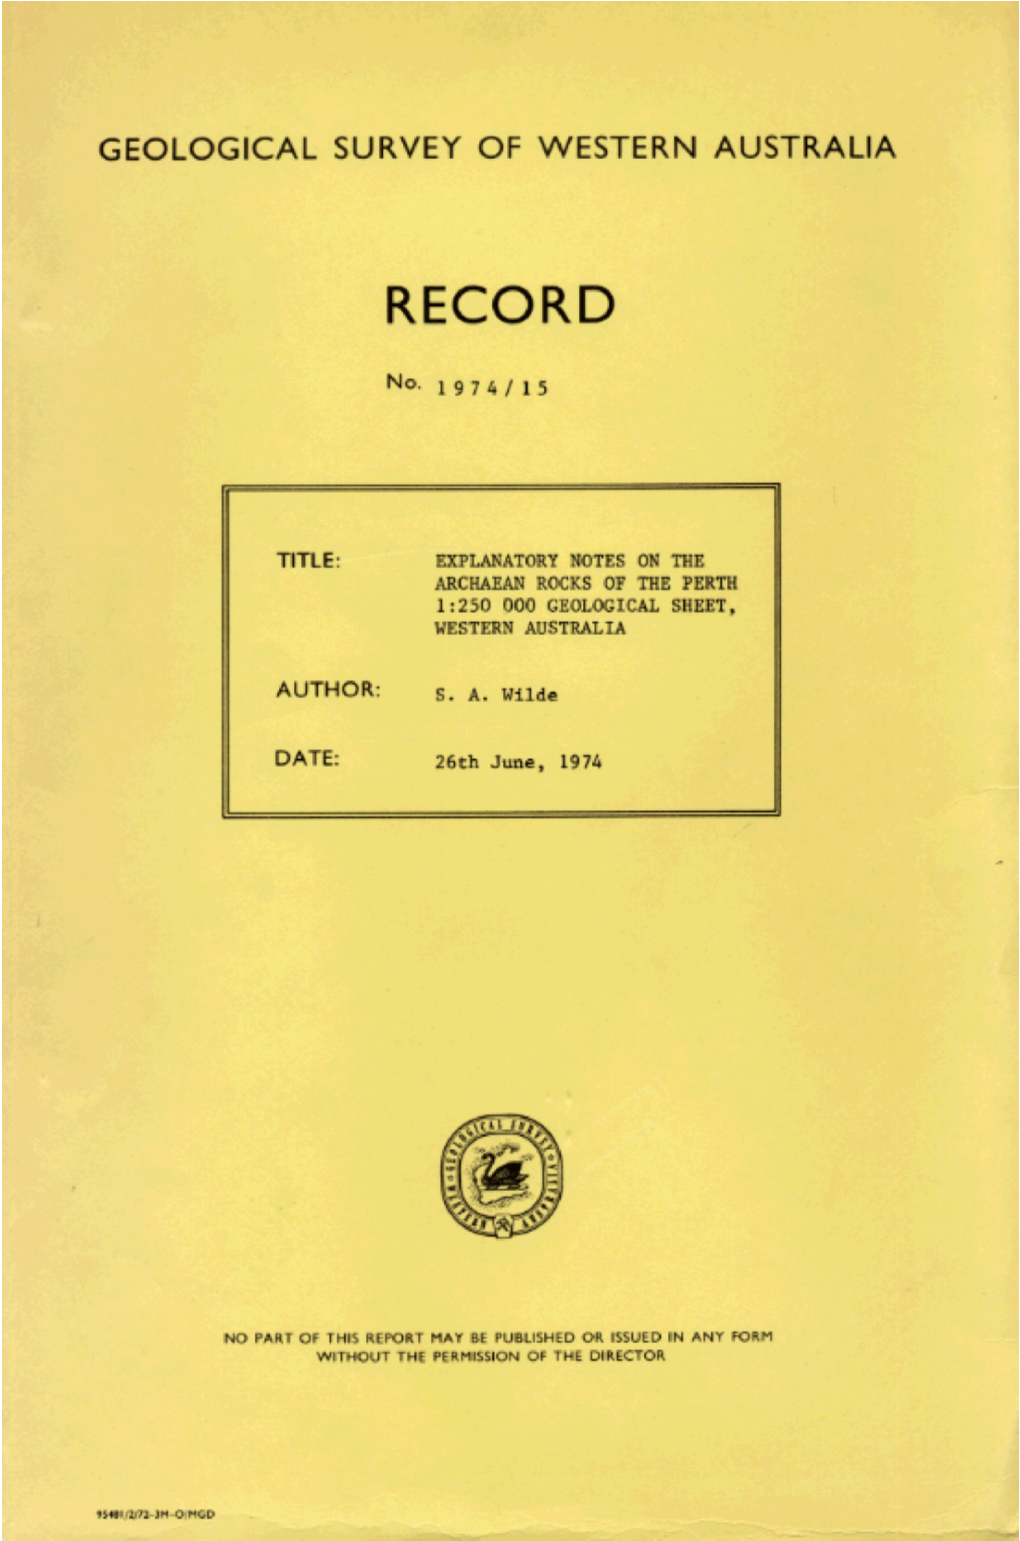 Record 1974/15: Explanatory Notes on the Archaean Rocks of the Perth 1